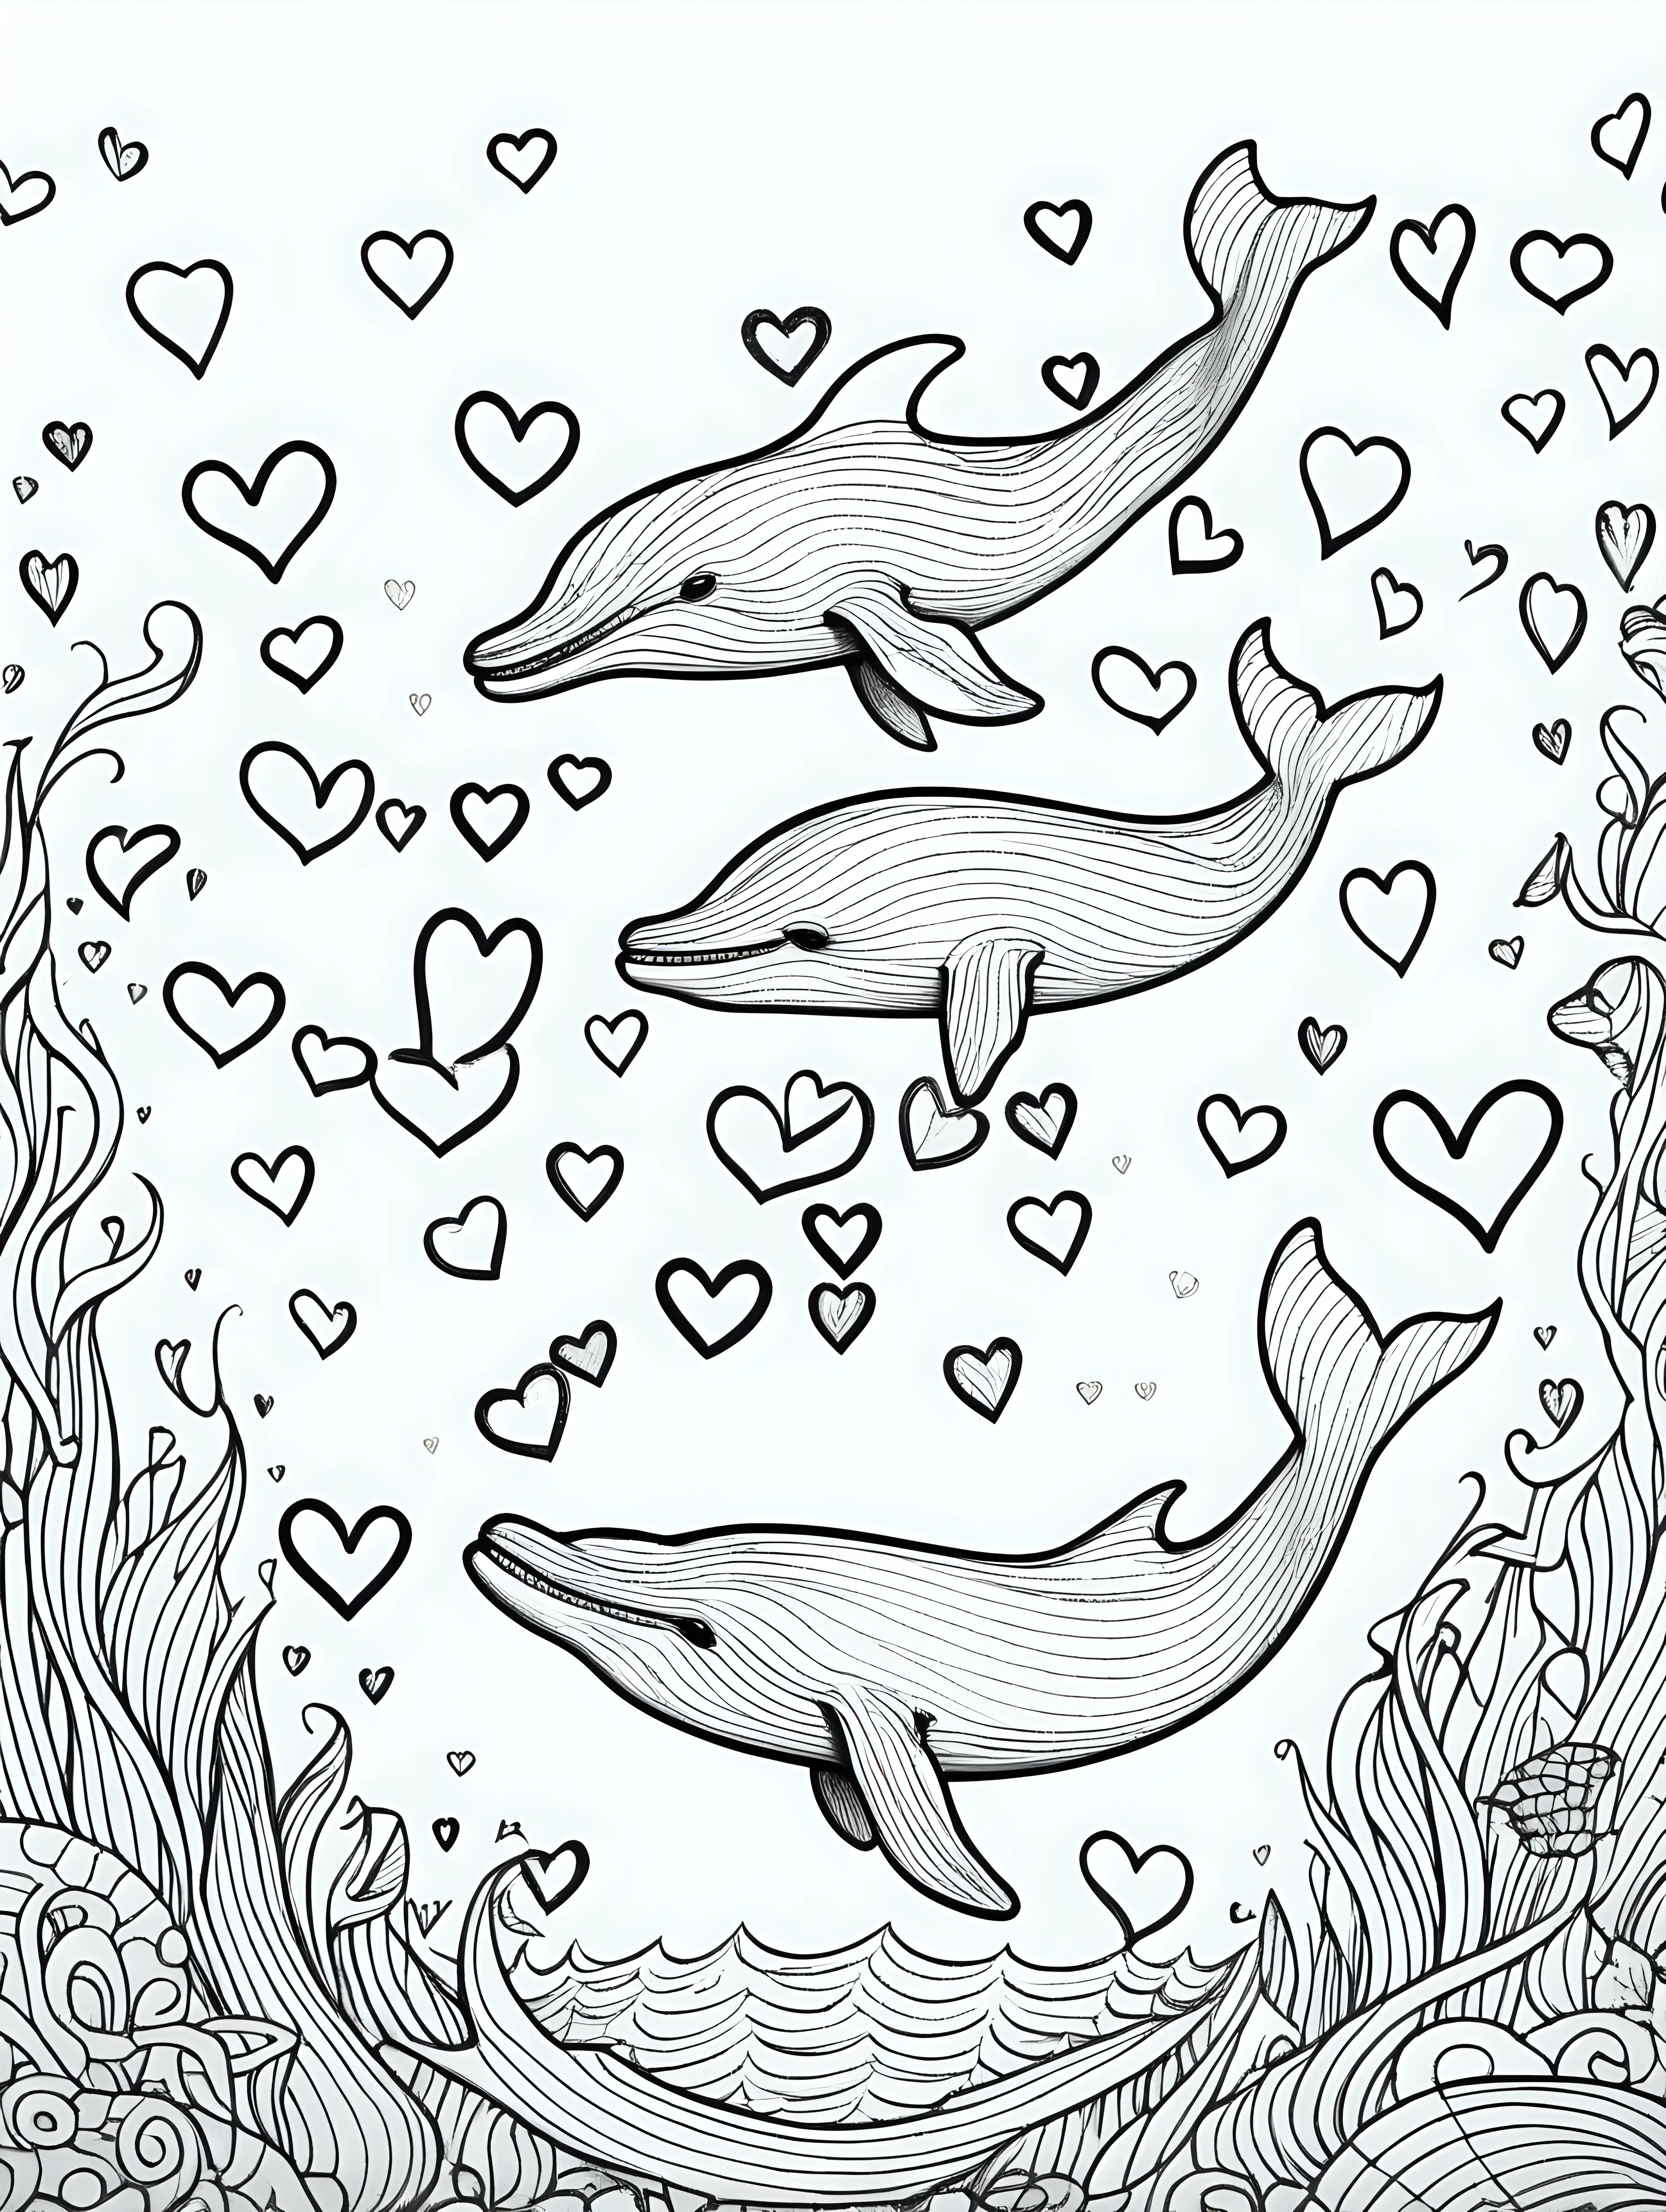 Whimsical Ocean Scene Coloring Page with Adorable Whales and Hearts